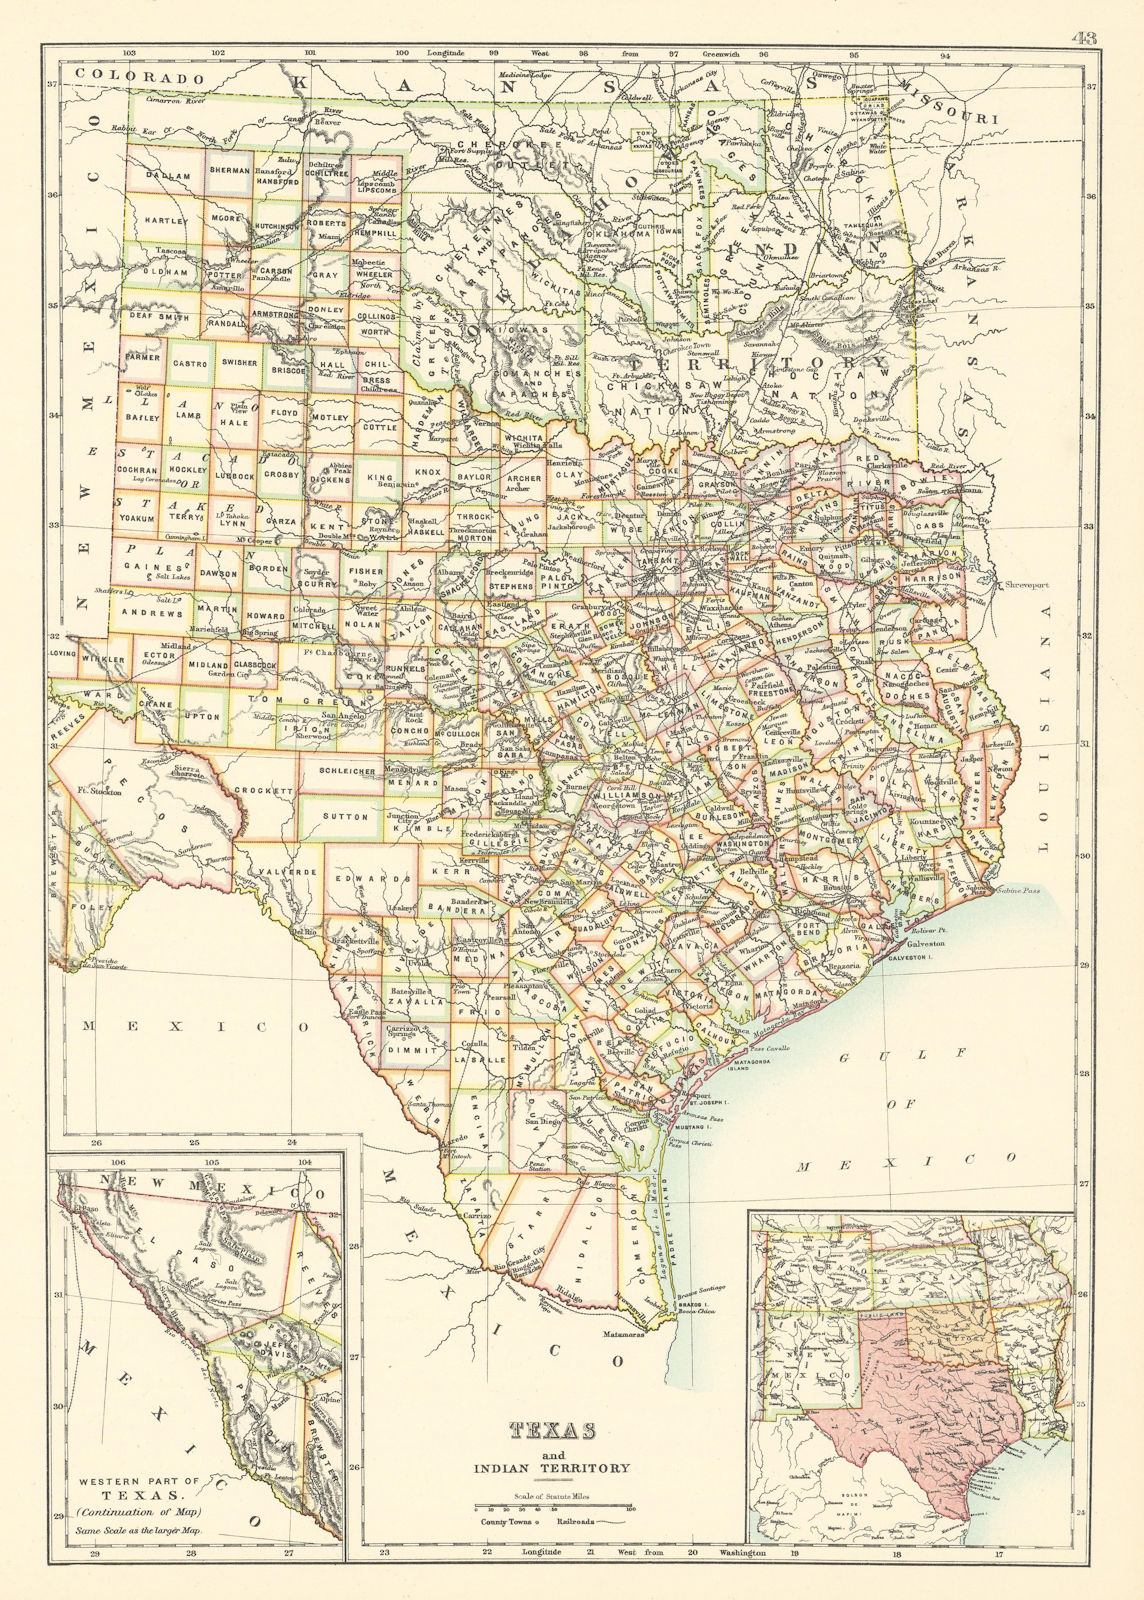 Associate Product Texas and Indian Territory state maps showing counties. BARTHOLOMEW 1898